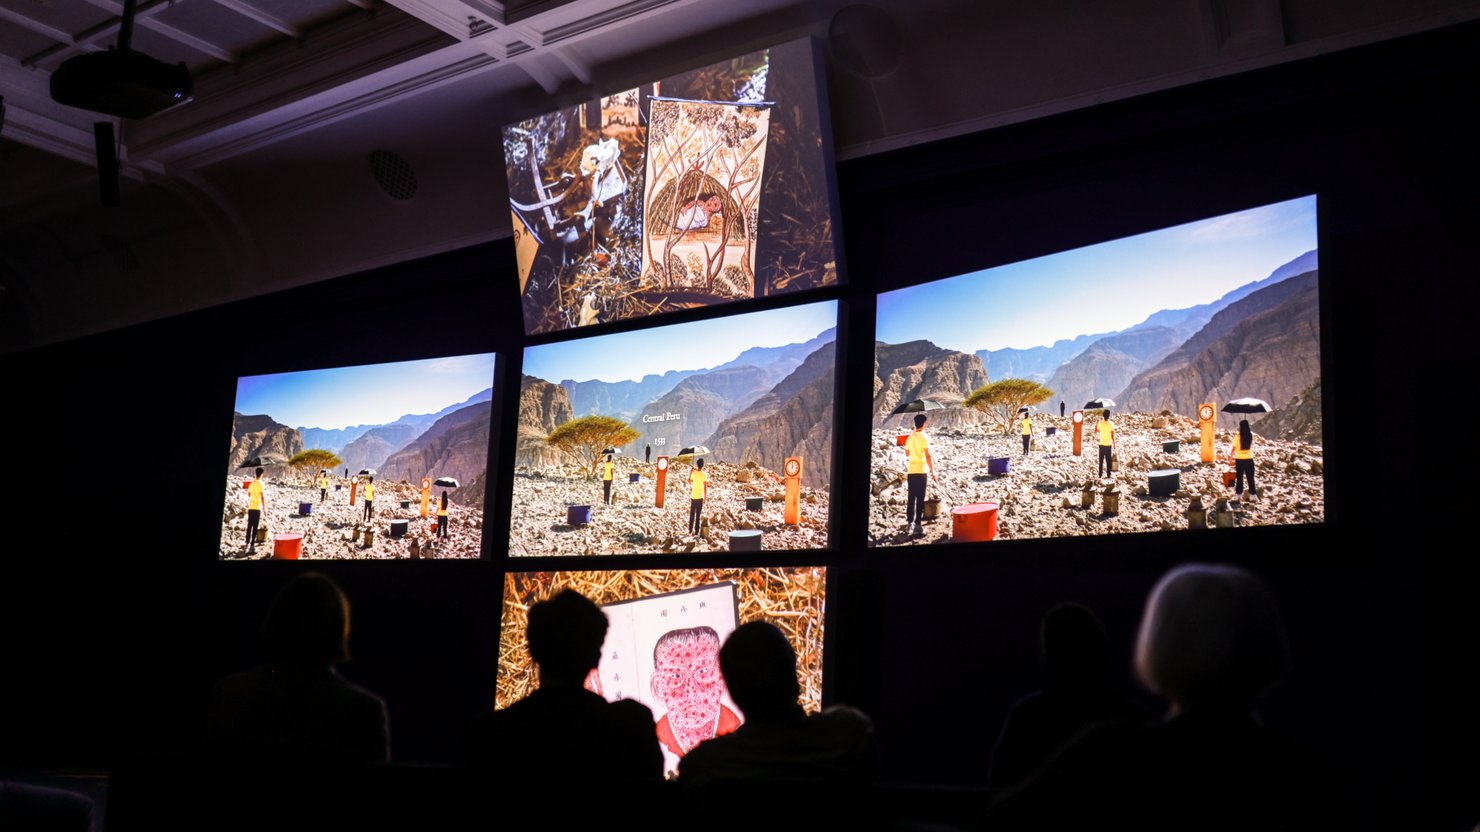 Audience watching film installation with screens showing mountainous landscapes